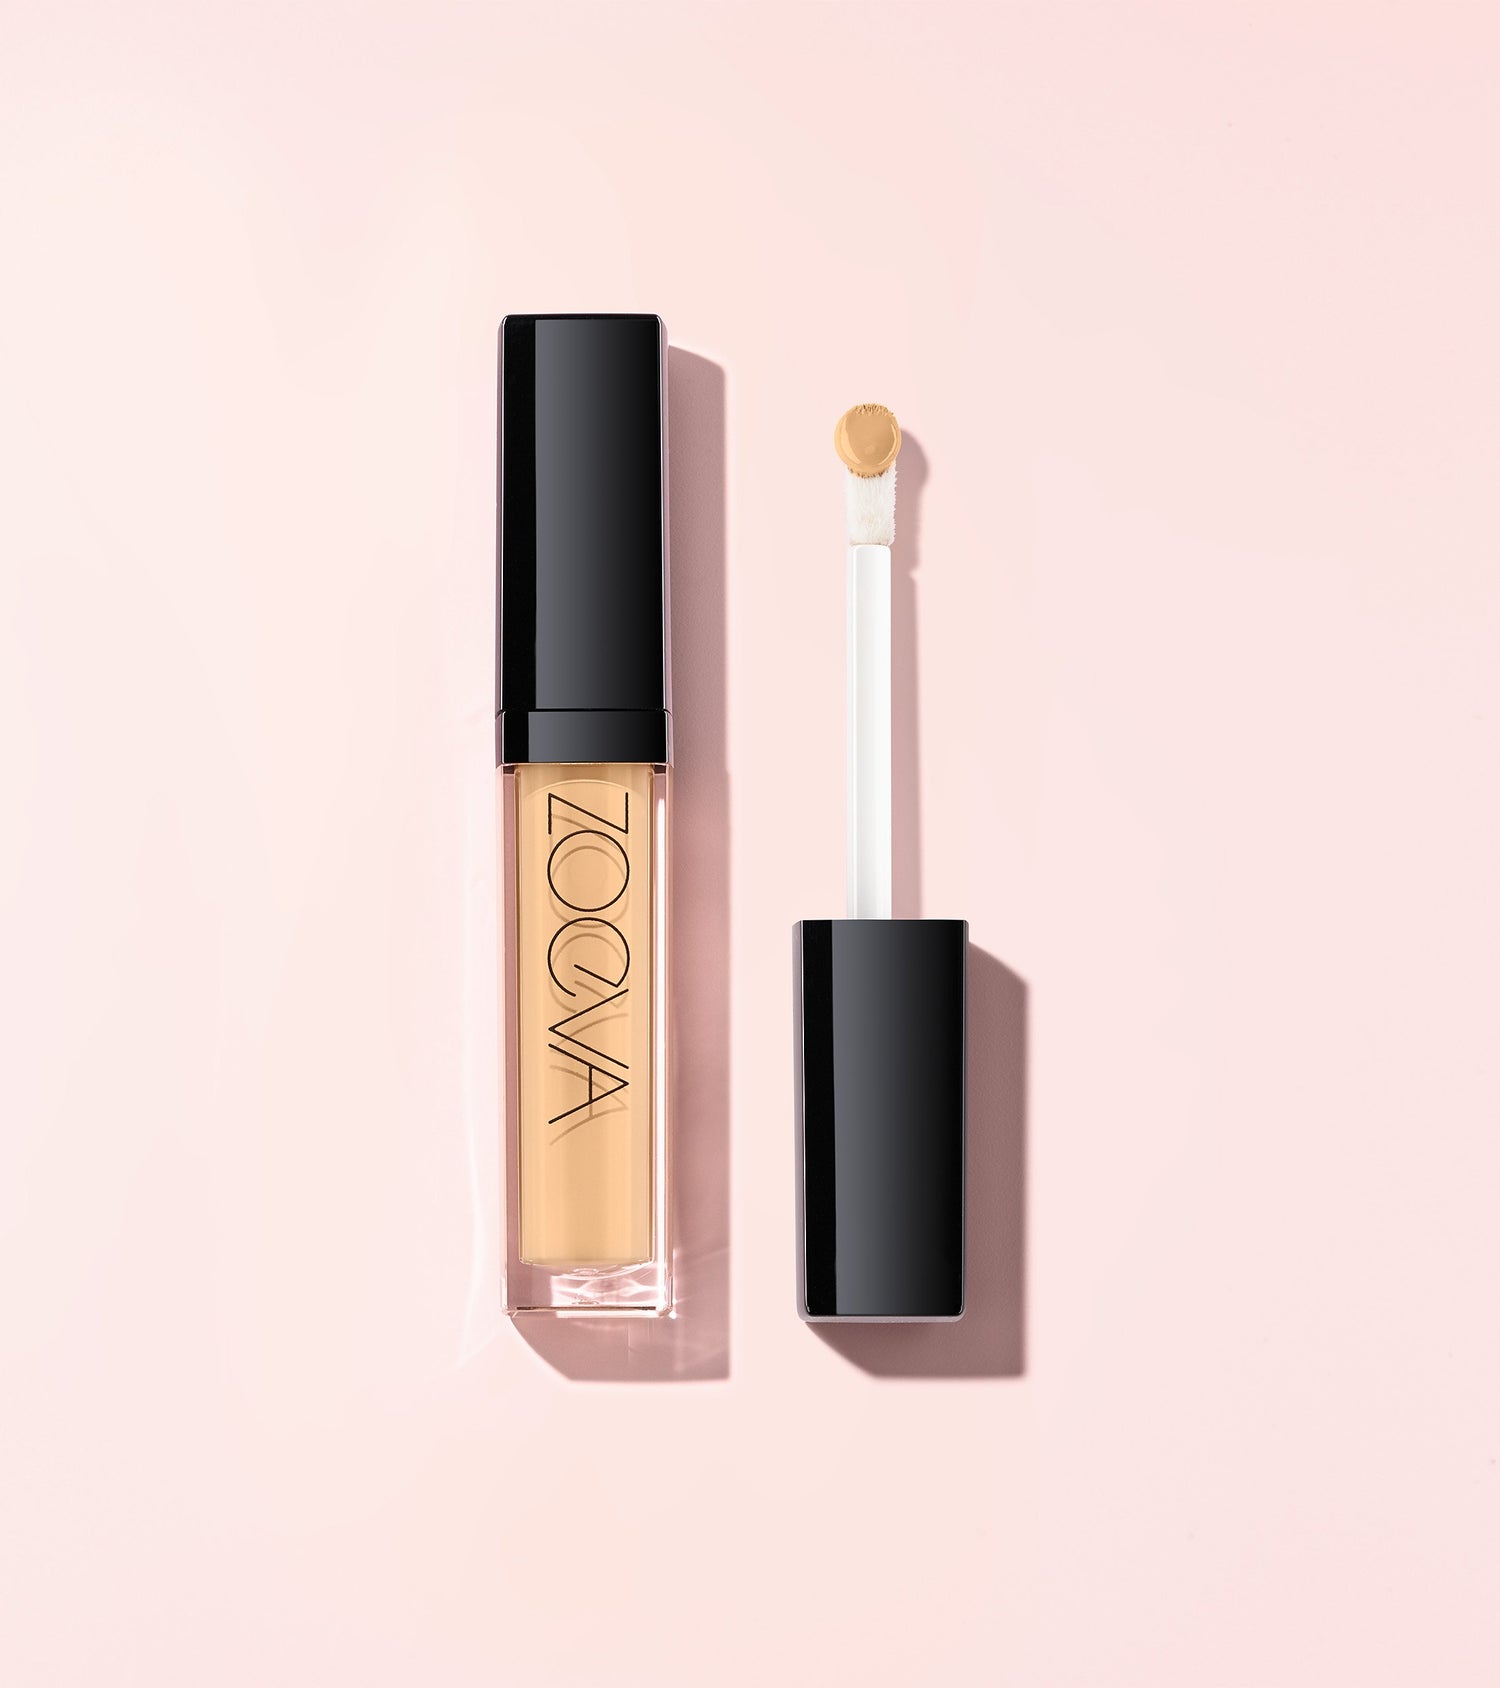 AUTHENTIK SKIN PERFECTOR CONCEALER (200 PRESENT) Main Image featured